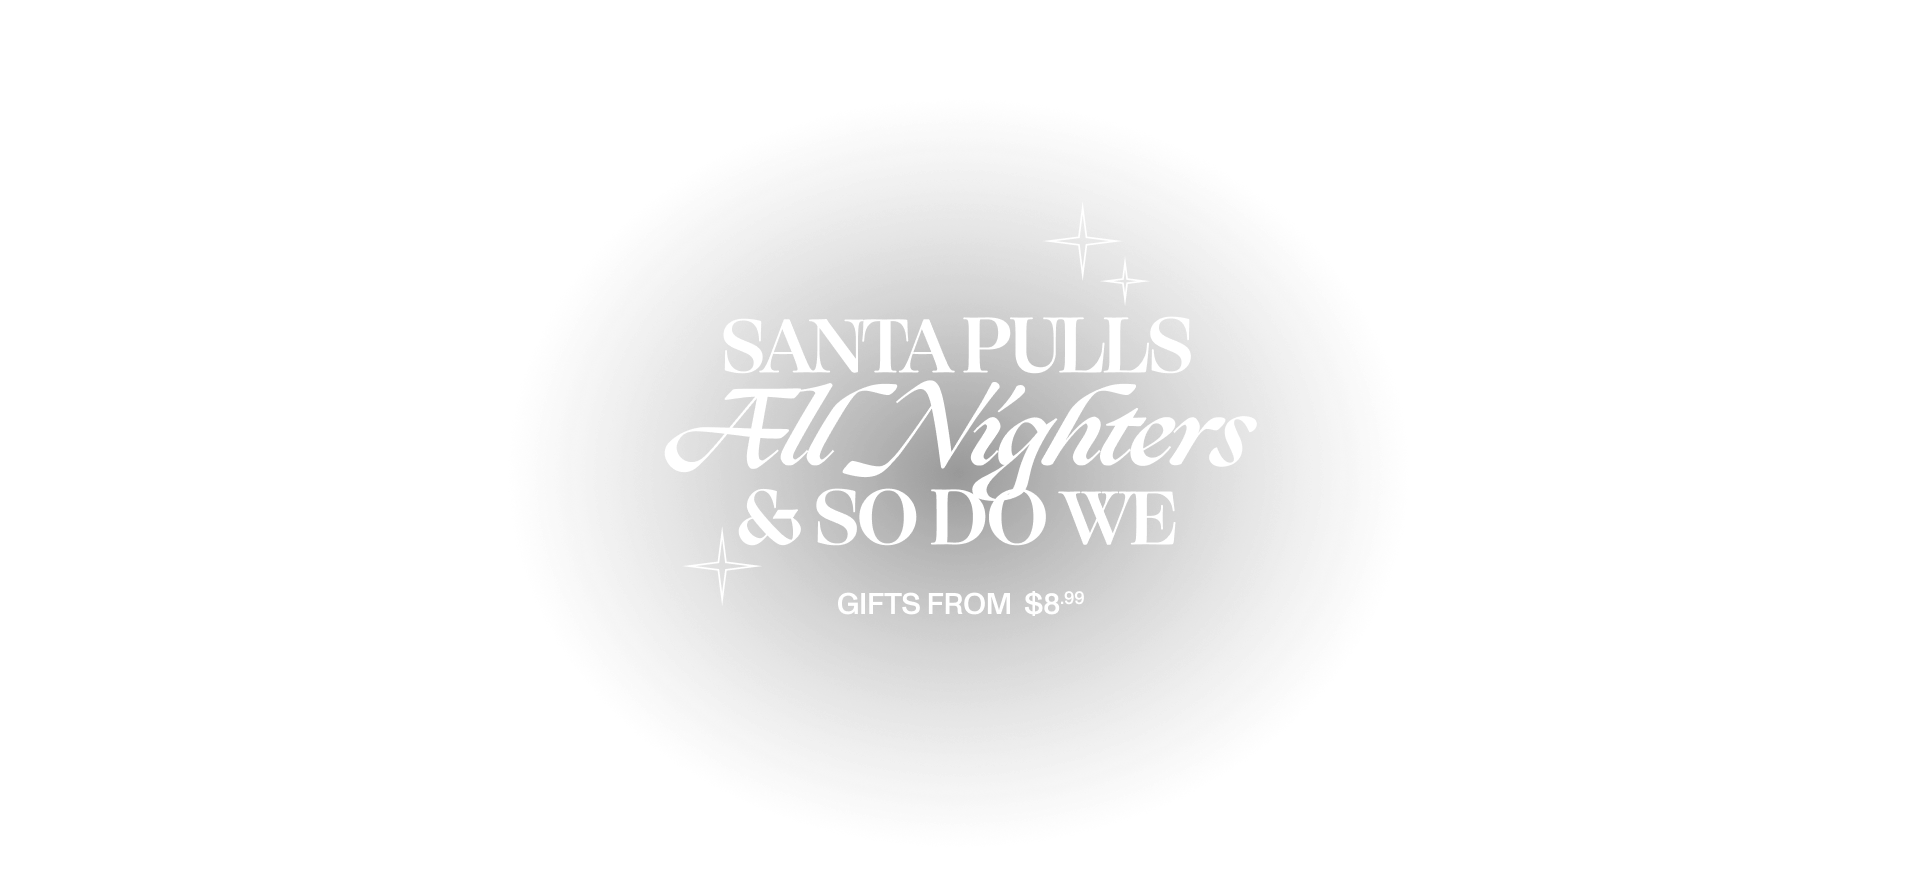 Santa pulls all nighters & So do we. Gifts from $8.99